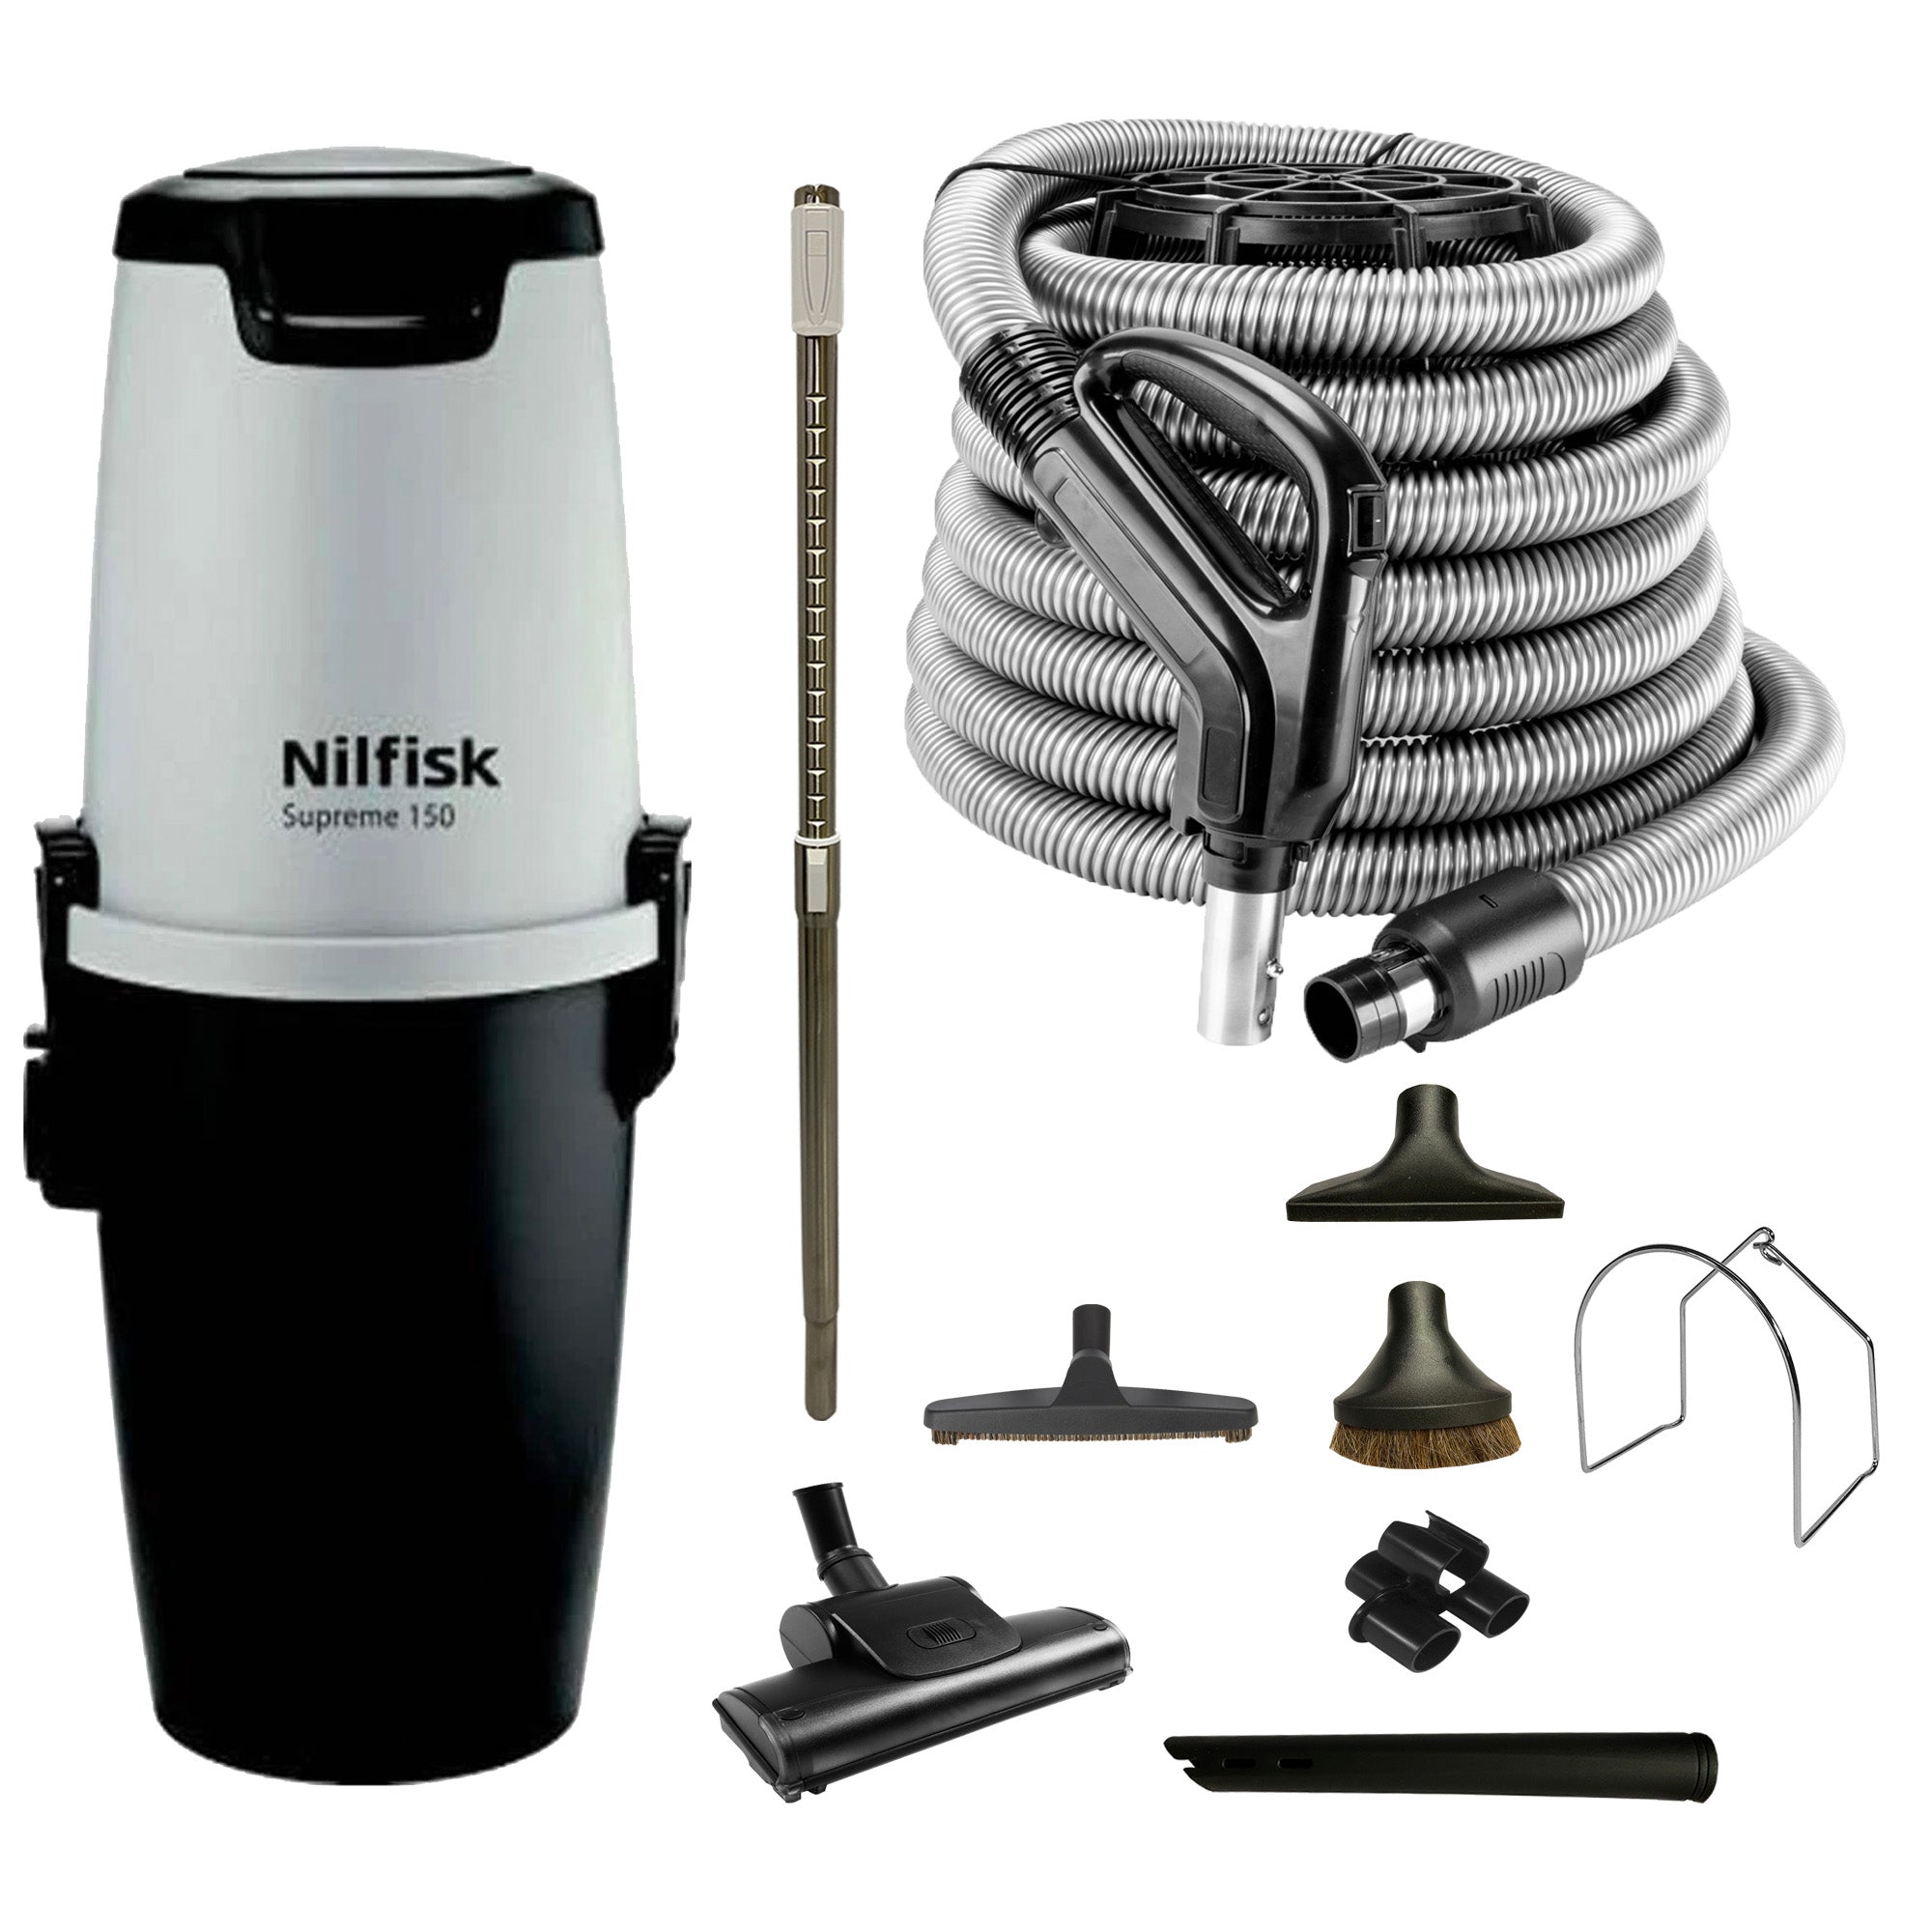 Nilfisk Supreme 150 Central Vacuum with Standard Air Package - Black